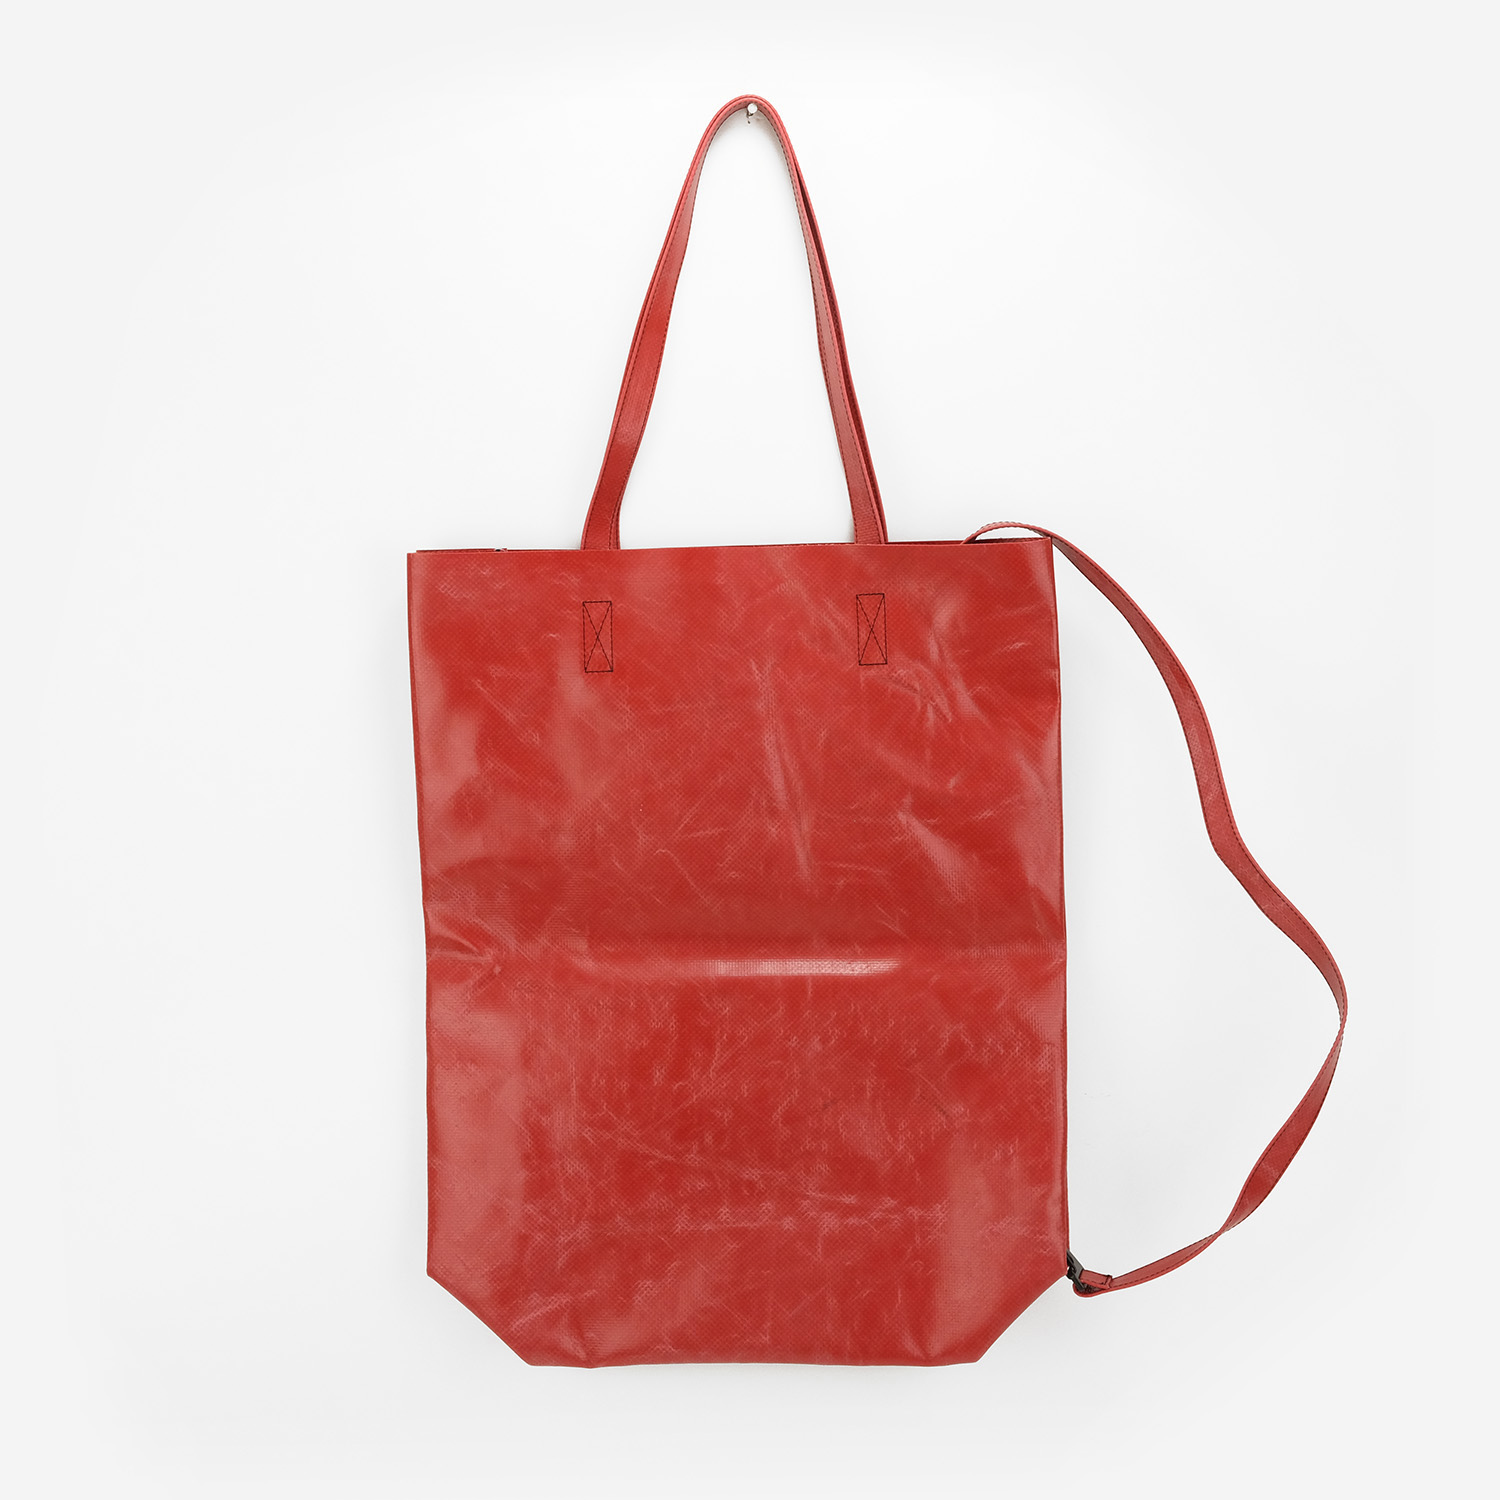 FREITAG :: F262 JULIEN :: The medium tote which can be worn as a backpack..